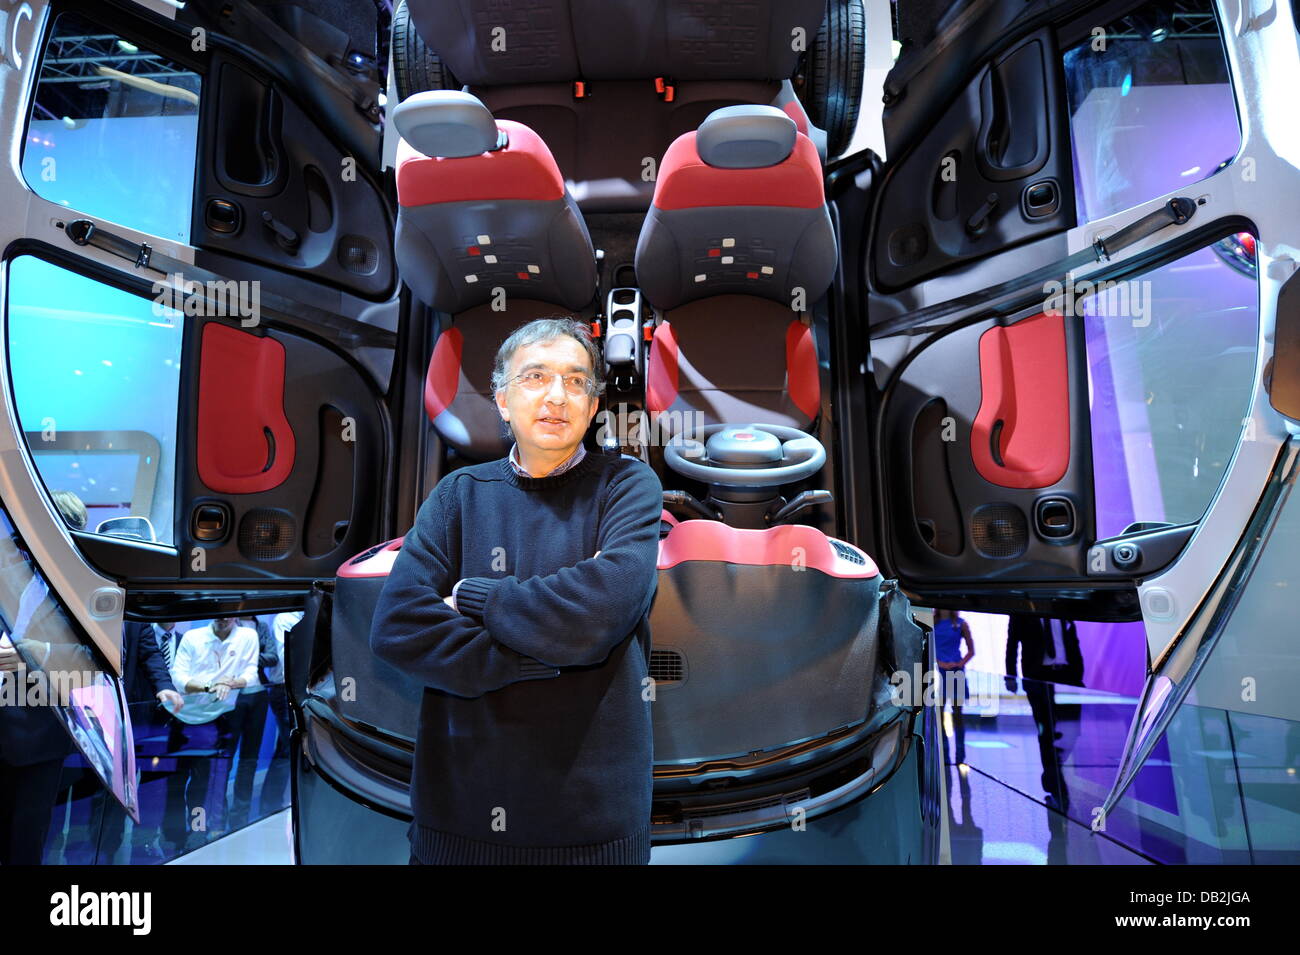 Head of Fiat Sergio Marchionne stands next to an open Fiat Panda during a press conference of the car manufacturer Ferrari at the International Motor Show IAA in Frankfurt Main, Germany, 13 September 2011. From 15 to 25 September 2011 exhibitors from all over the world will present new trends of the automotive industry, headed by electronic mobility and hybrid vehicles. Photo: Arne Stock Photo